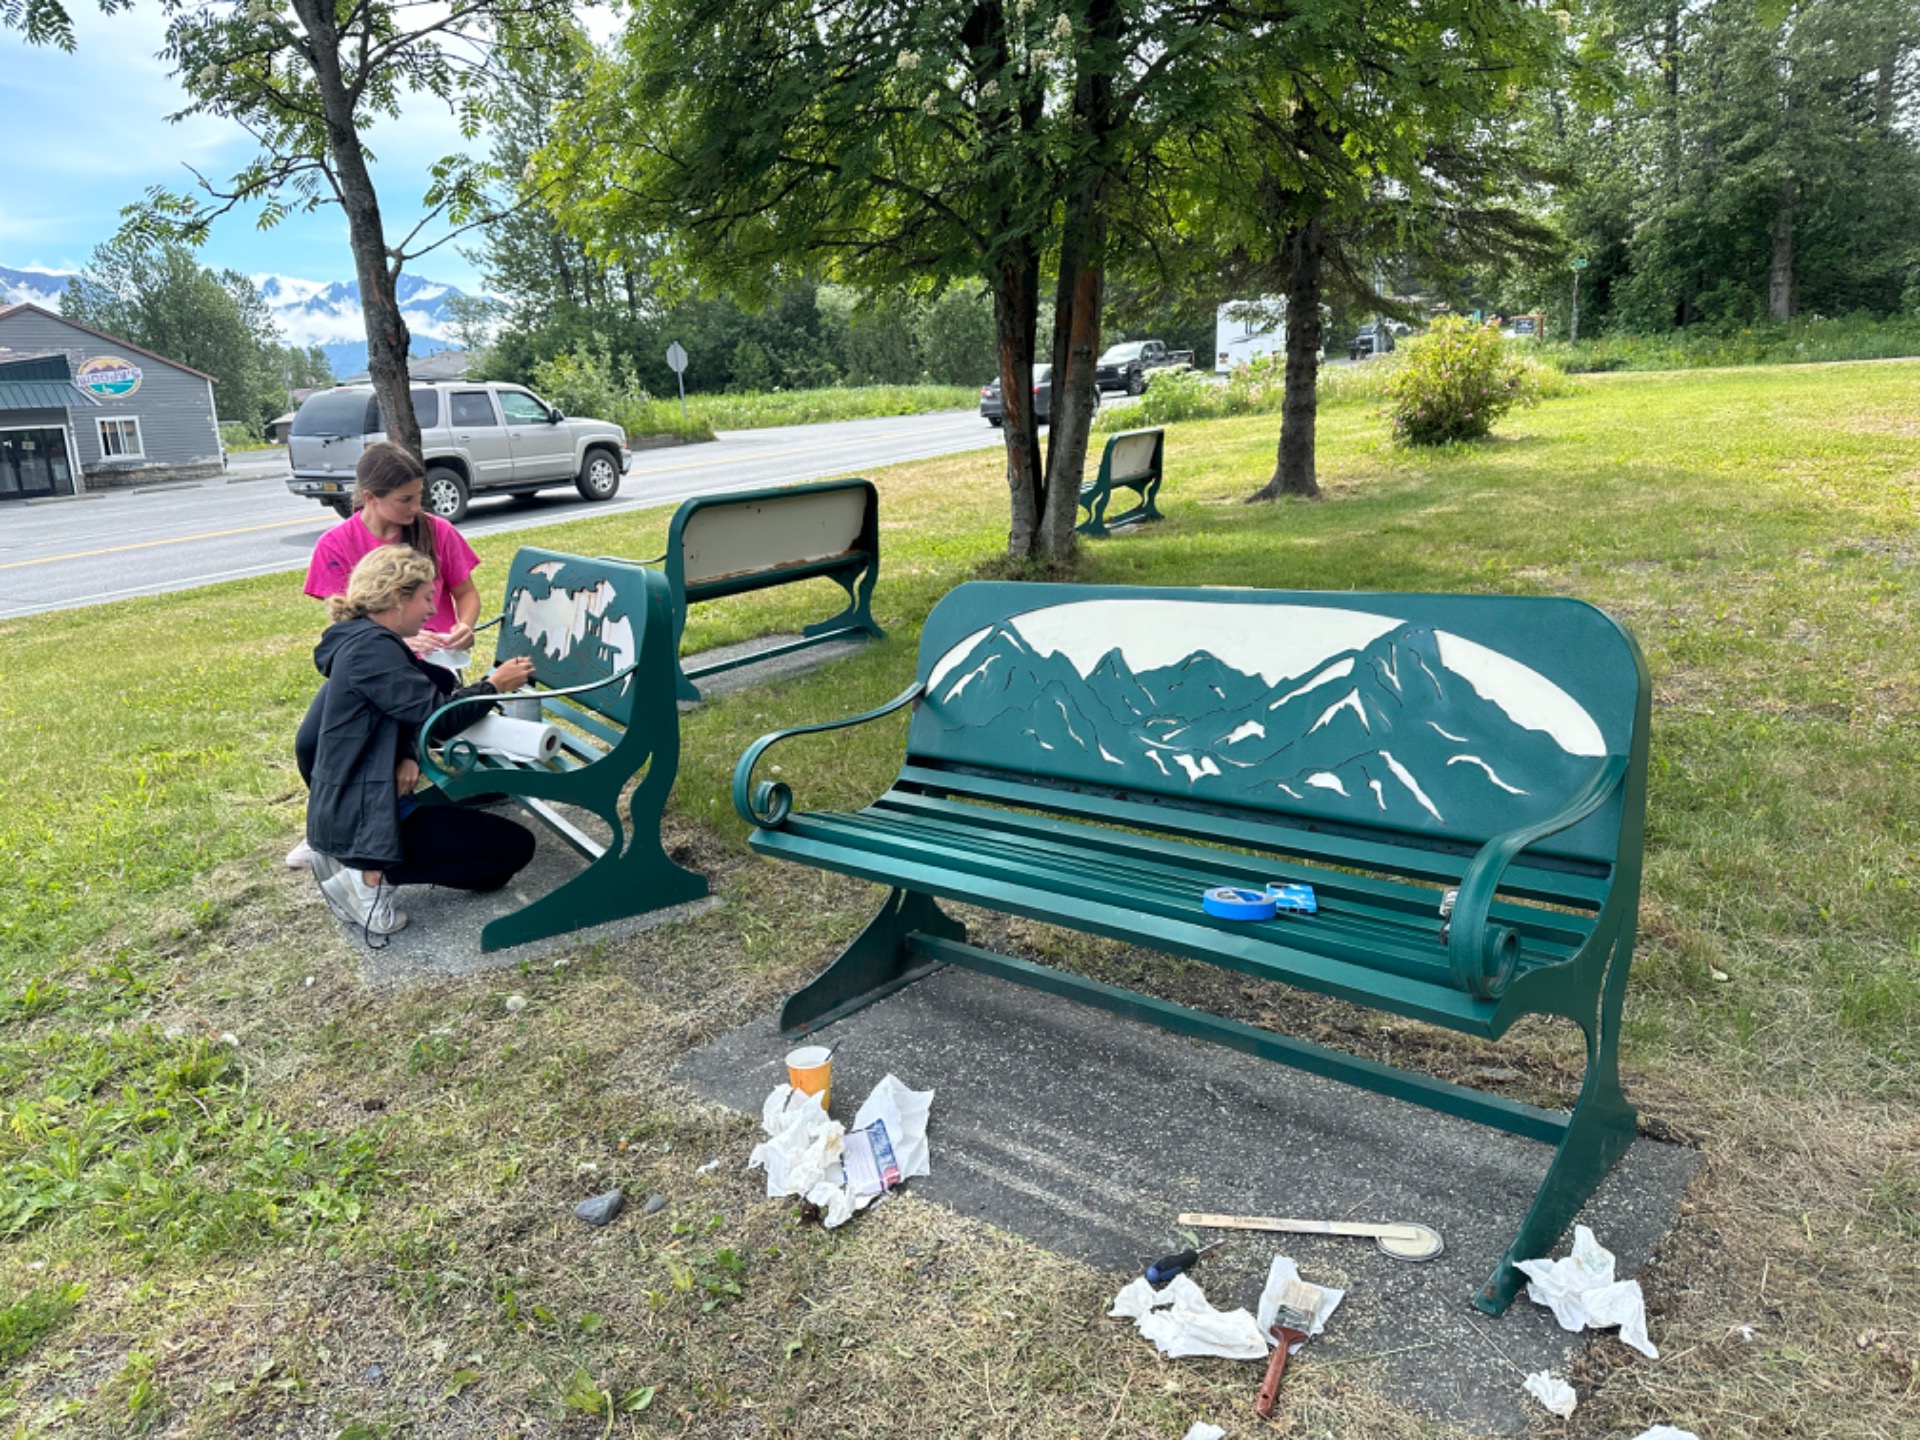 Repainting Park Benches 